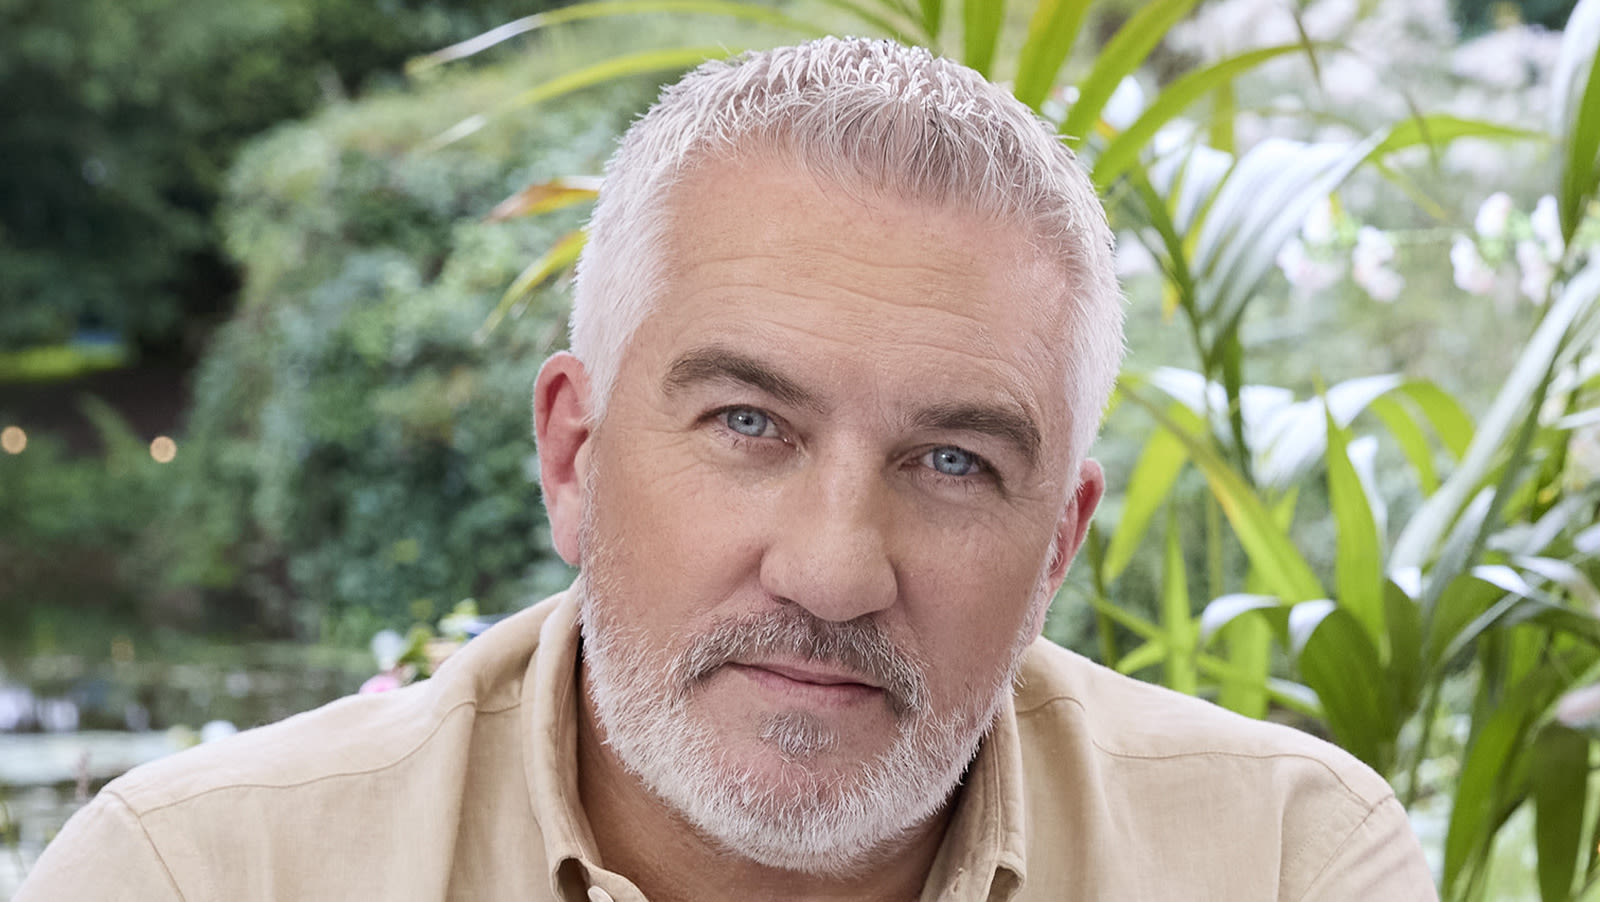 Paul Hollywood Tells Us His Favorite American Baked Goods (And The One He Hates) - Exclusive Interview